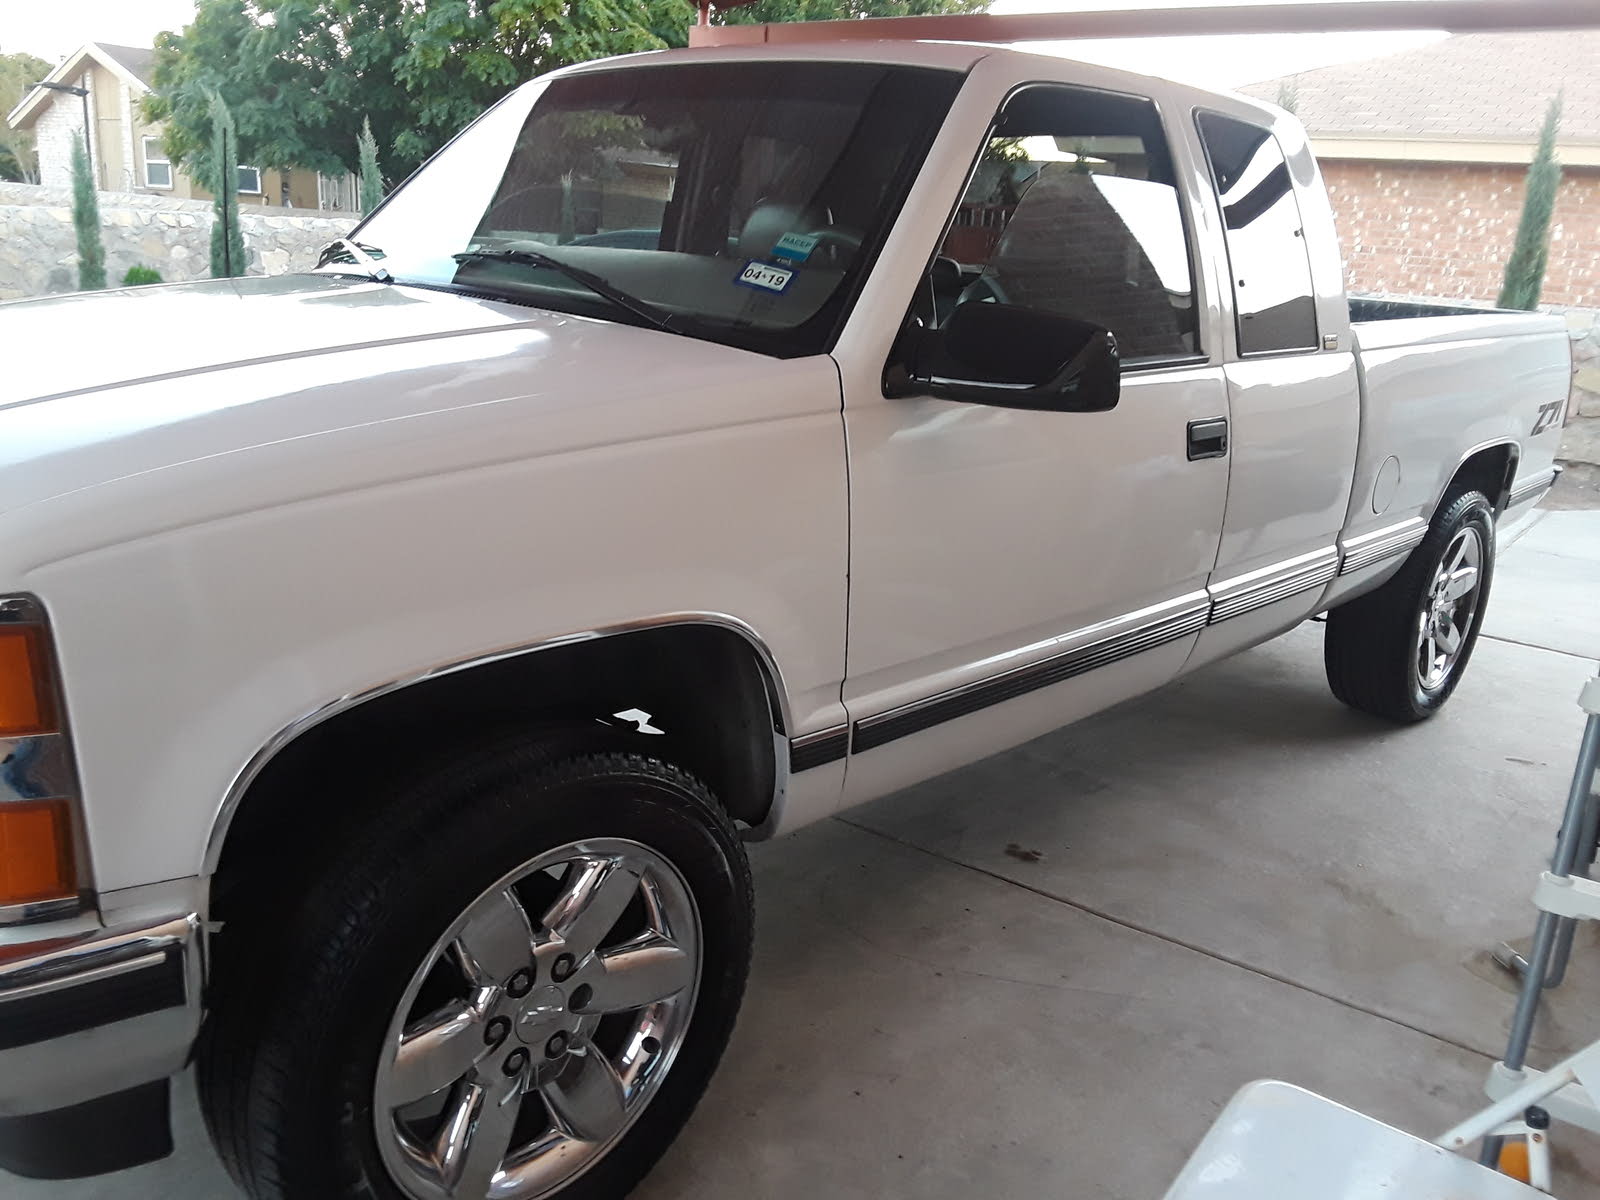 Chevrolet C K 1500 Questions Will A 6 0 Fit A 1997 Chevy Z71 With A 5 7 Cargurus